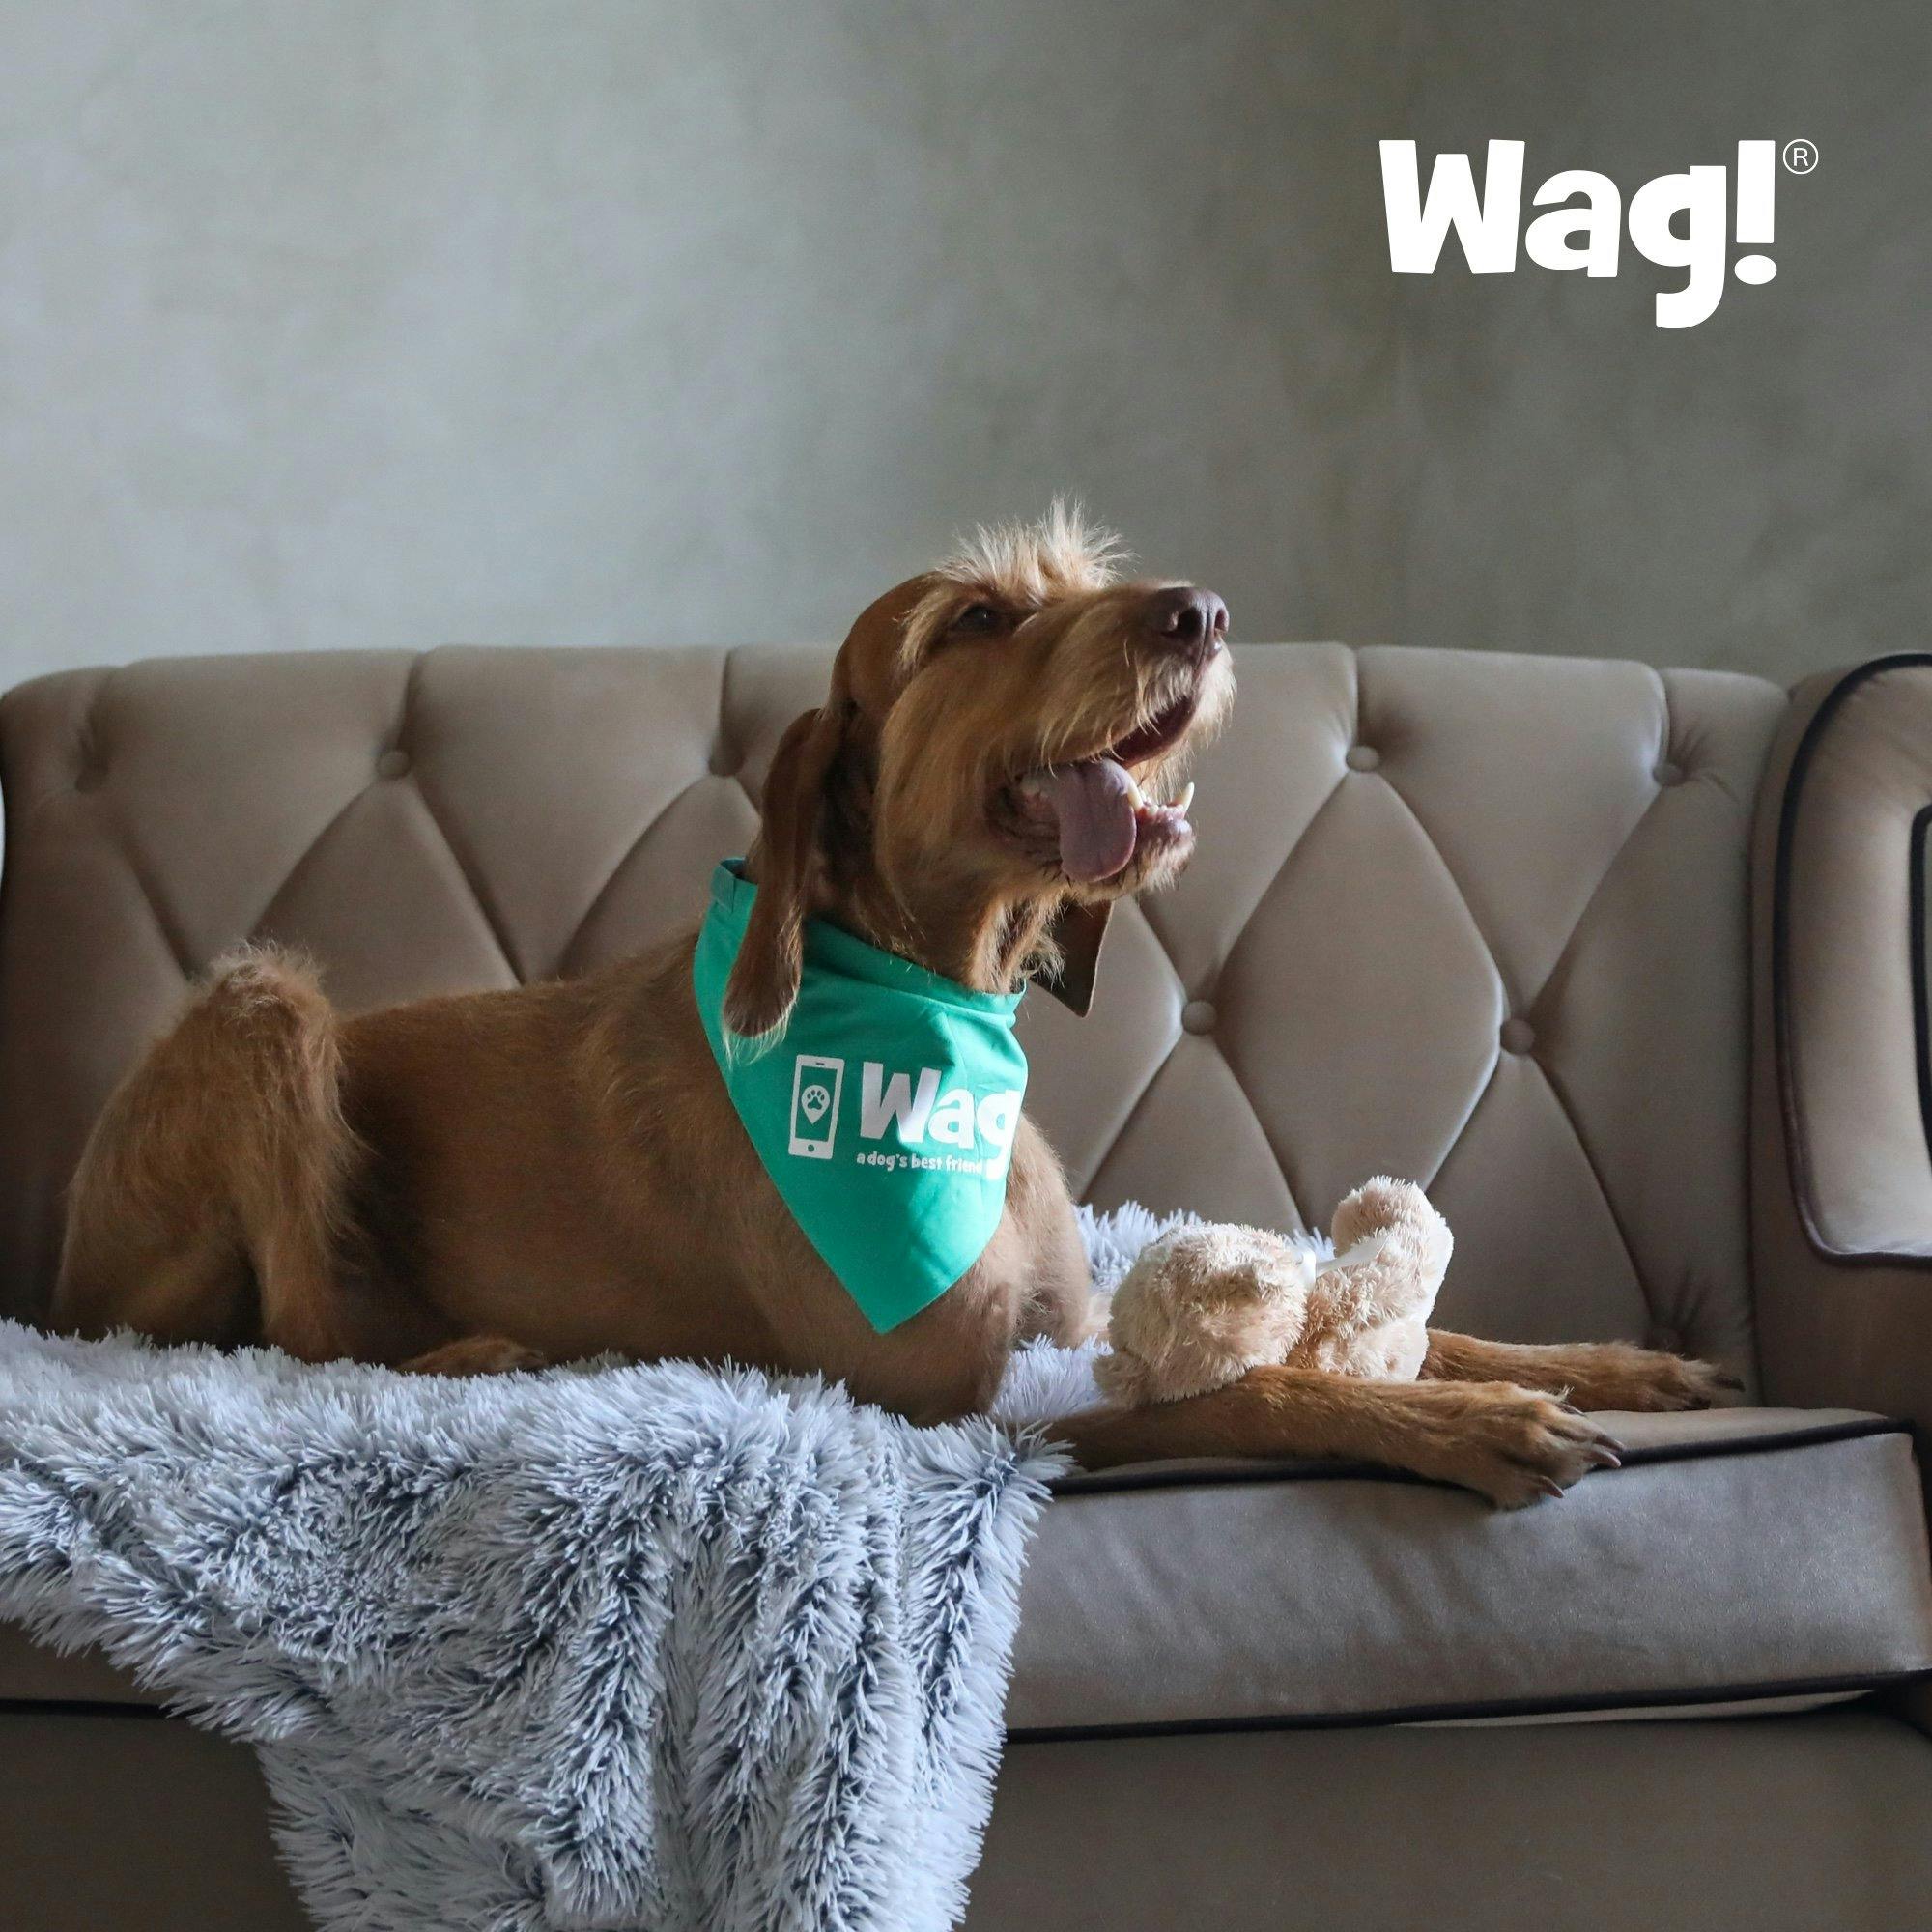 daily-wag-whats-the-difference-between-doggy-daycare-and-wag-drop-ins-hero-image